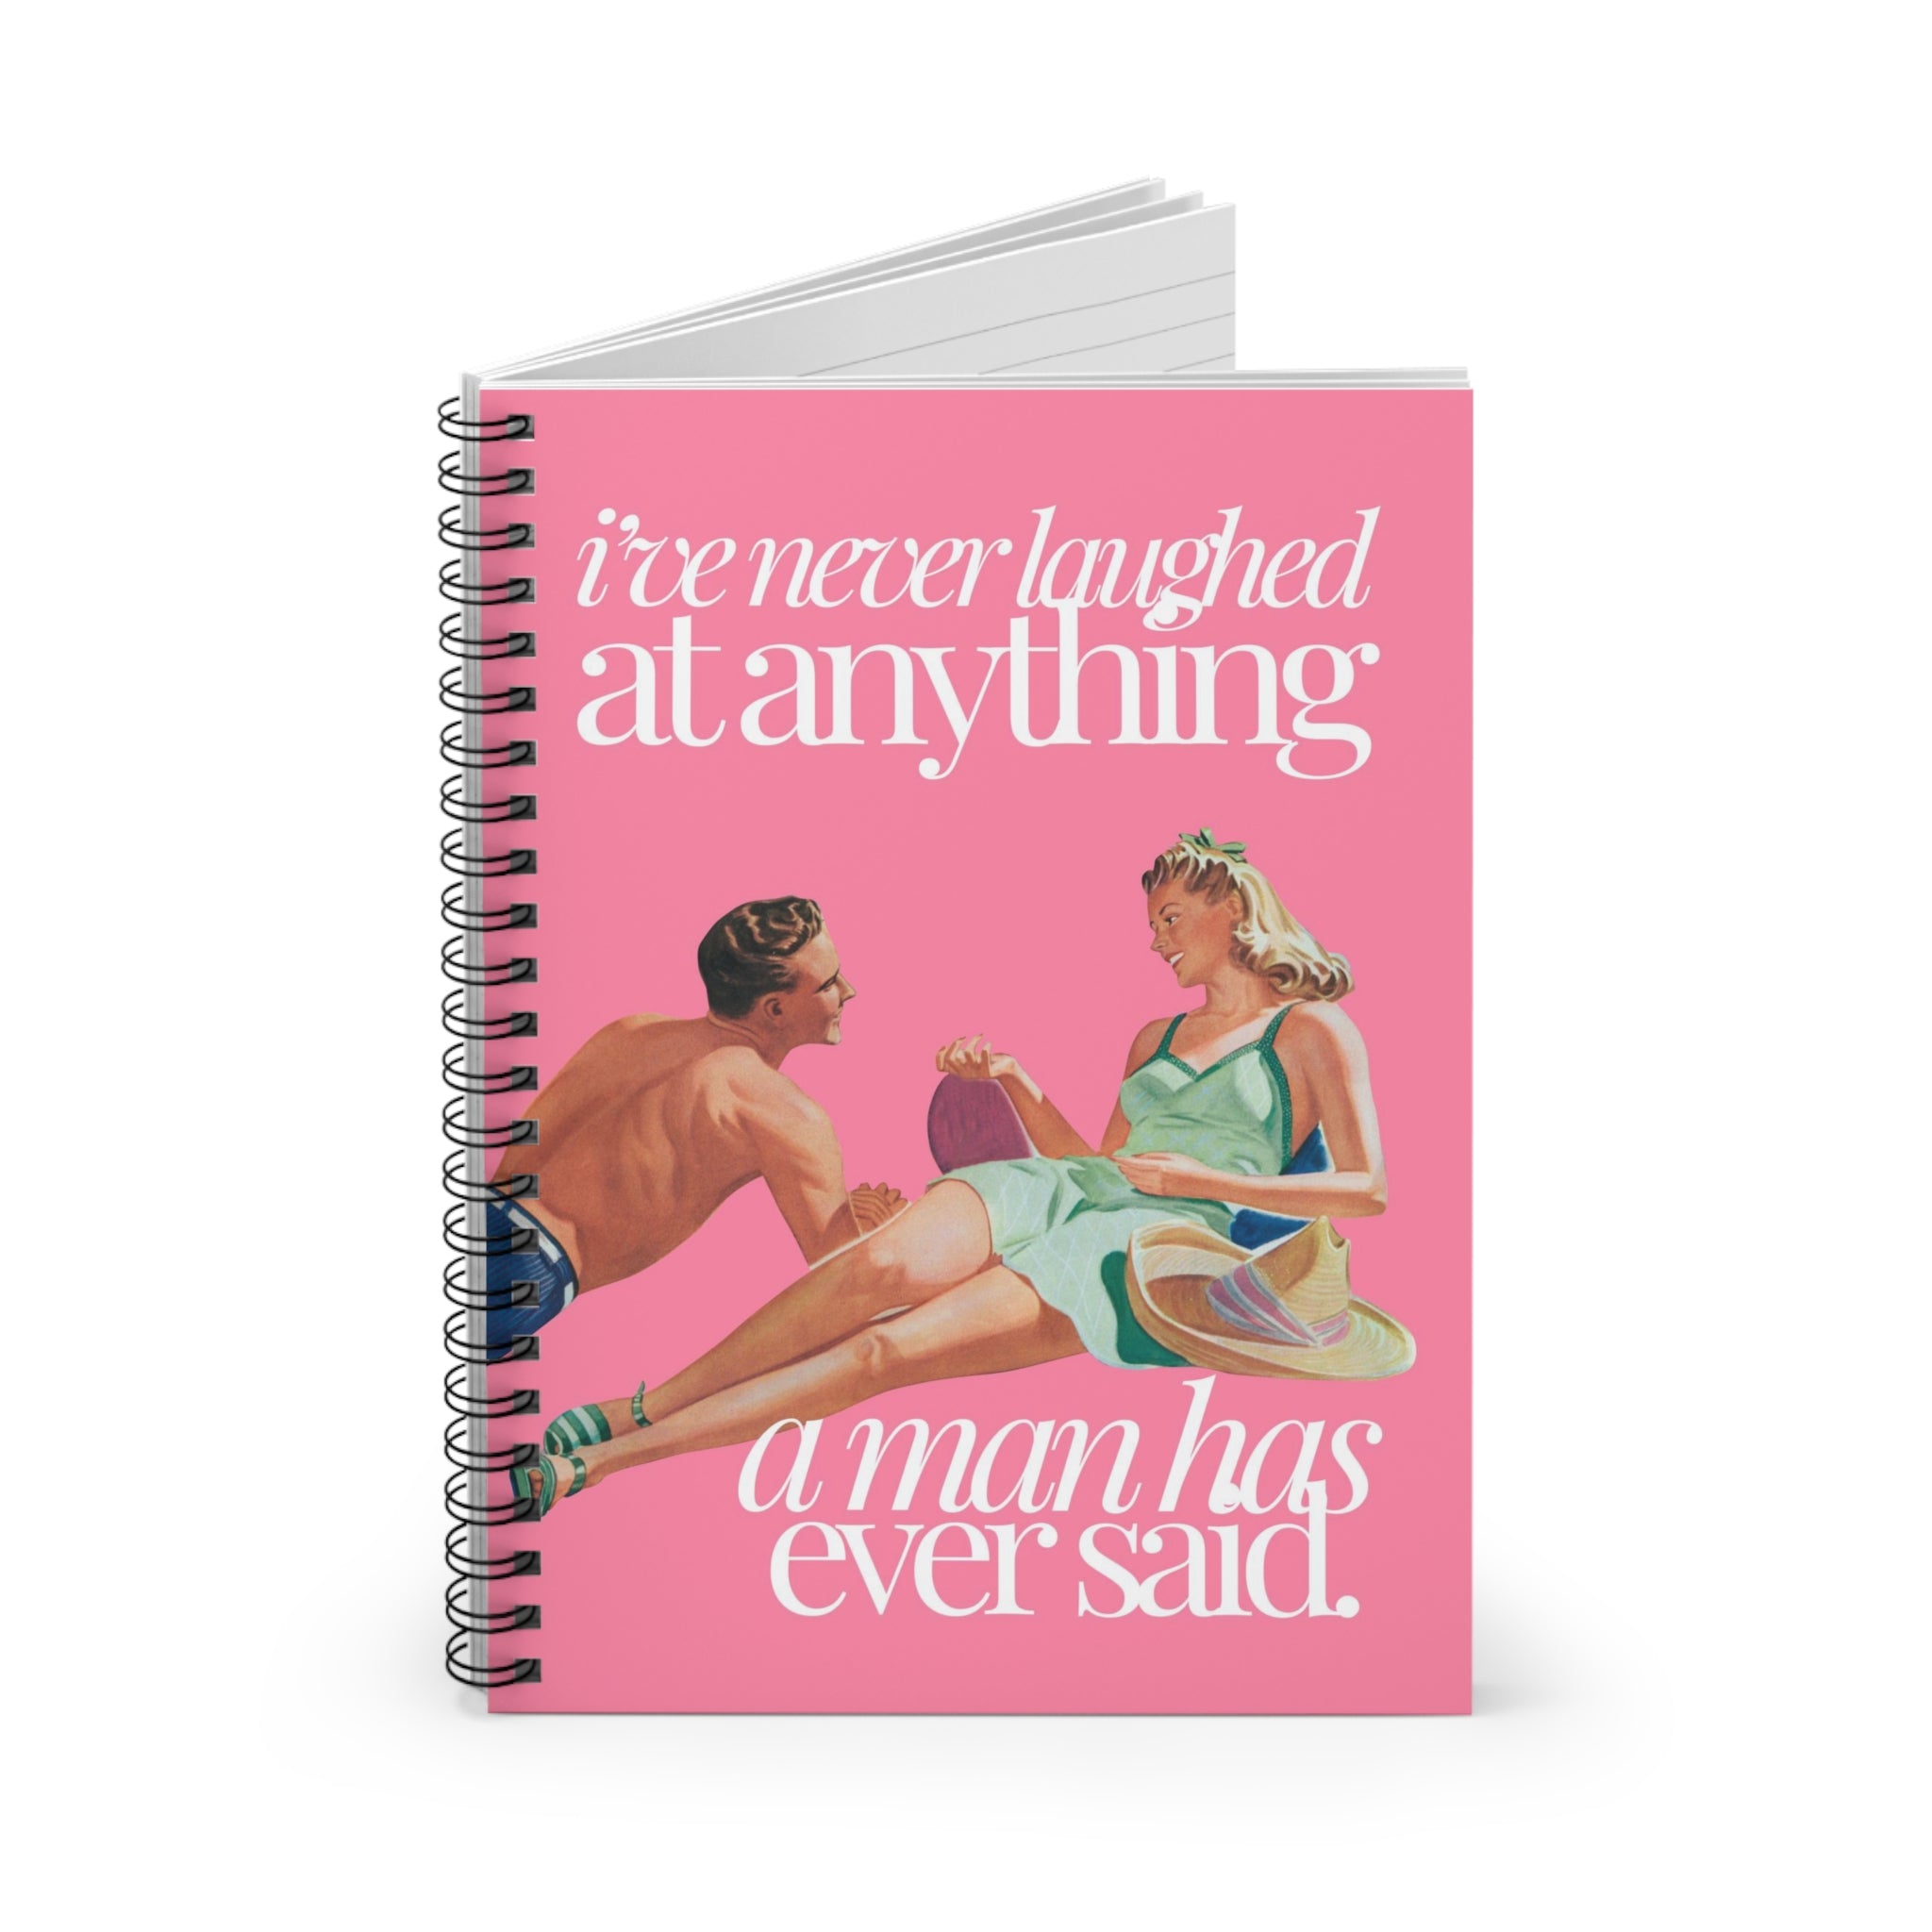 I've Never Laughed at Anything Spiral Notebook